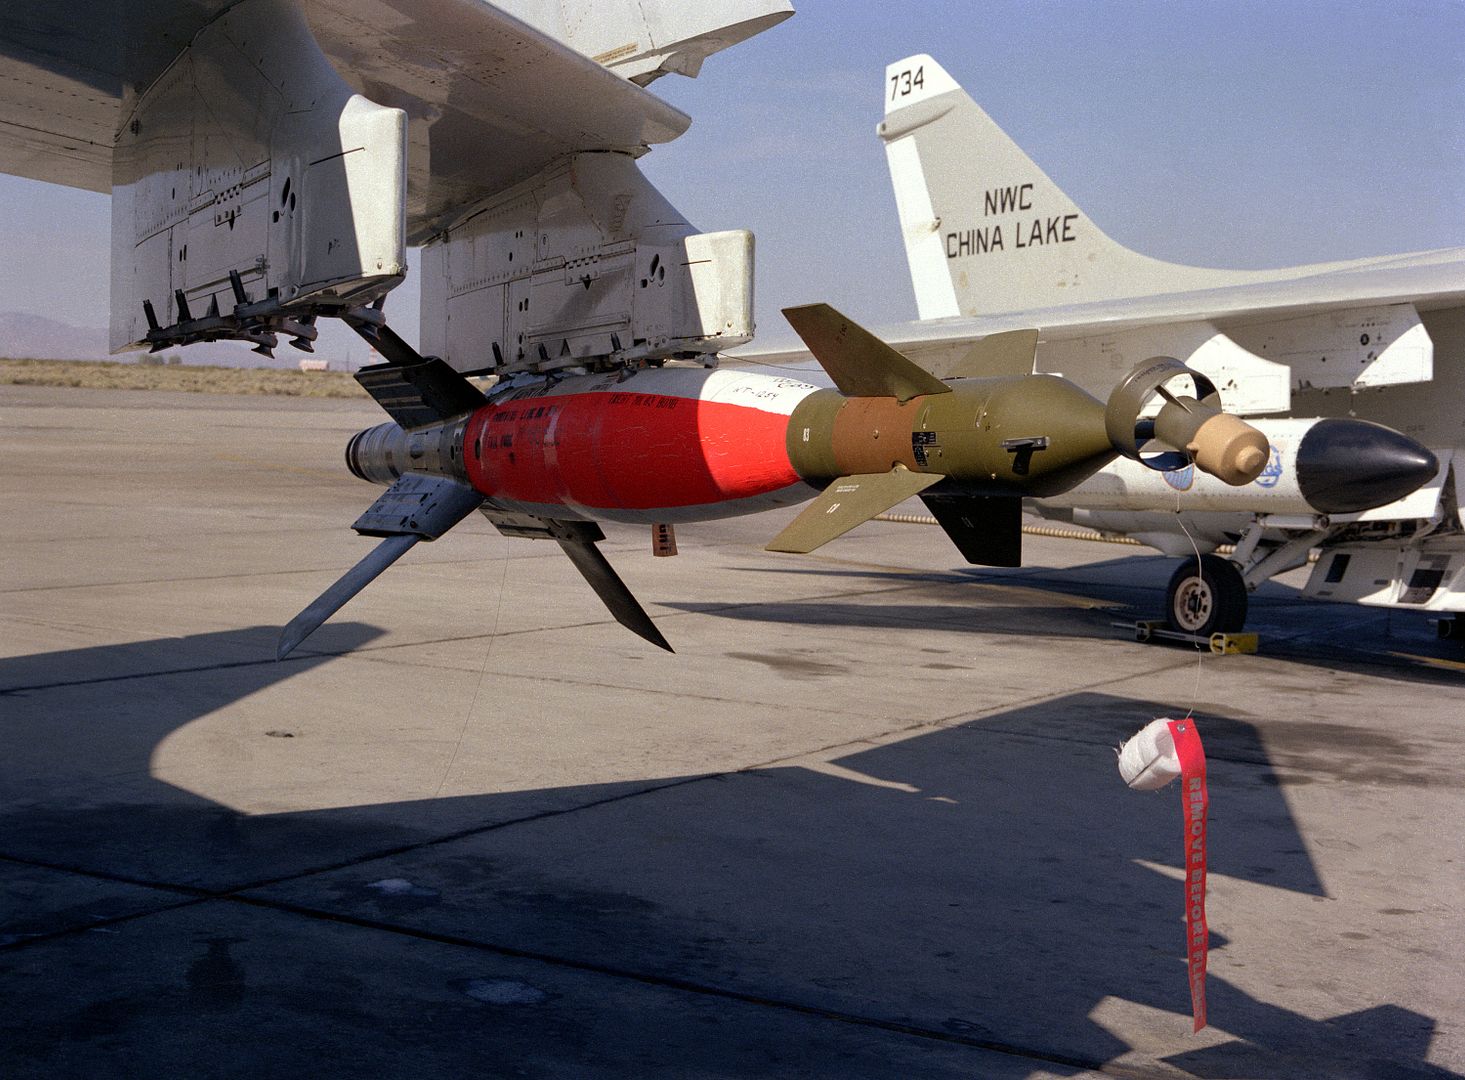 A Close Up View Of A Skipper II Laser Guided Bomb Mounted On The Wing Of An A 6 Intruder Aircraft